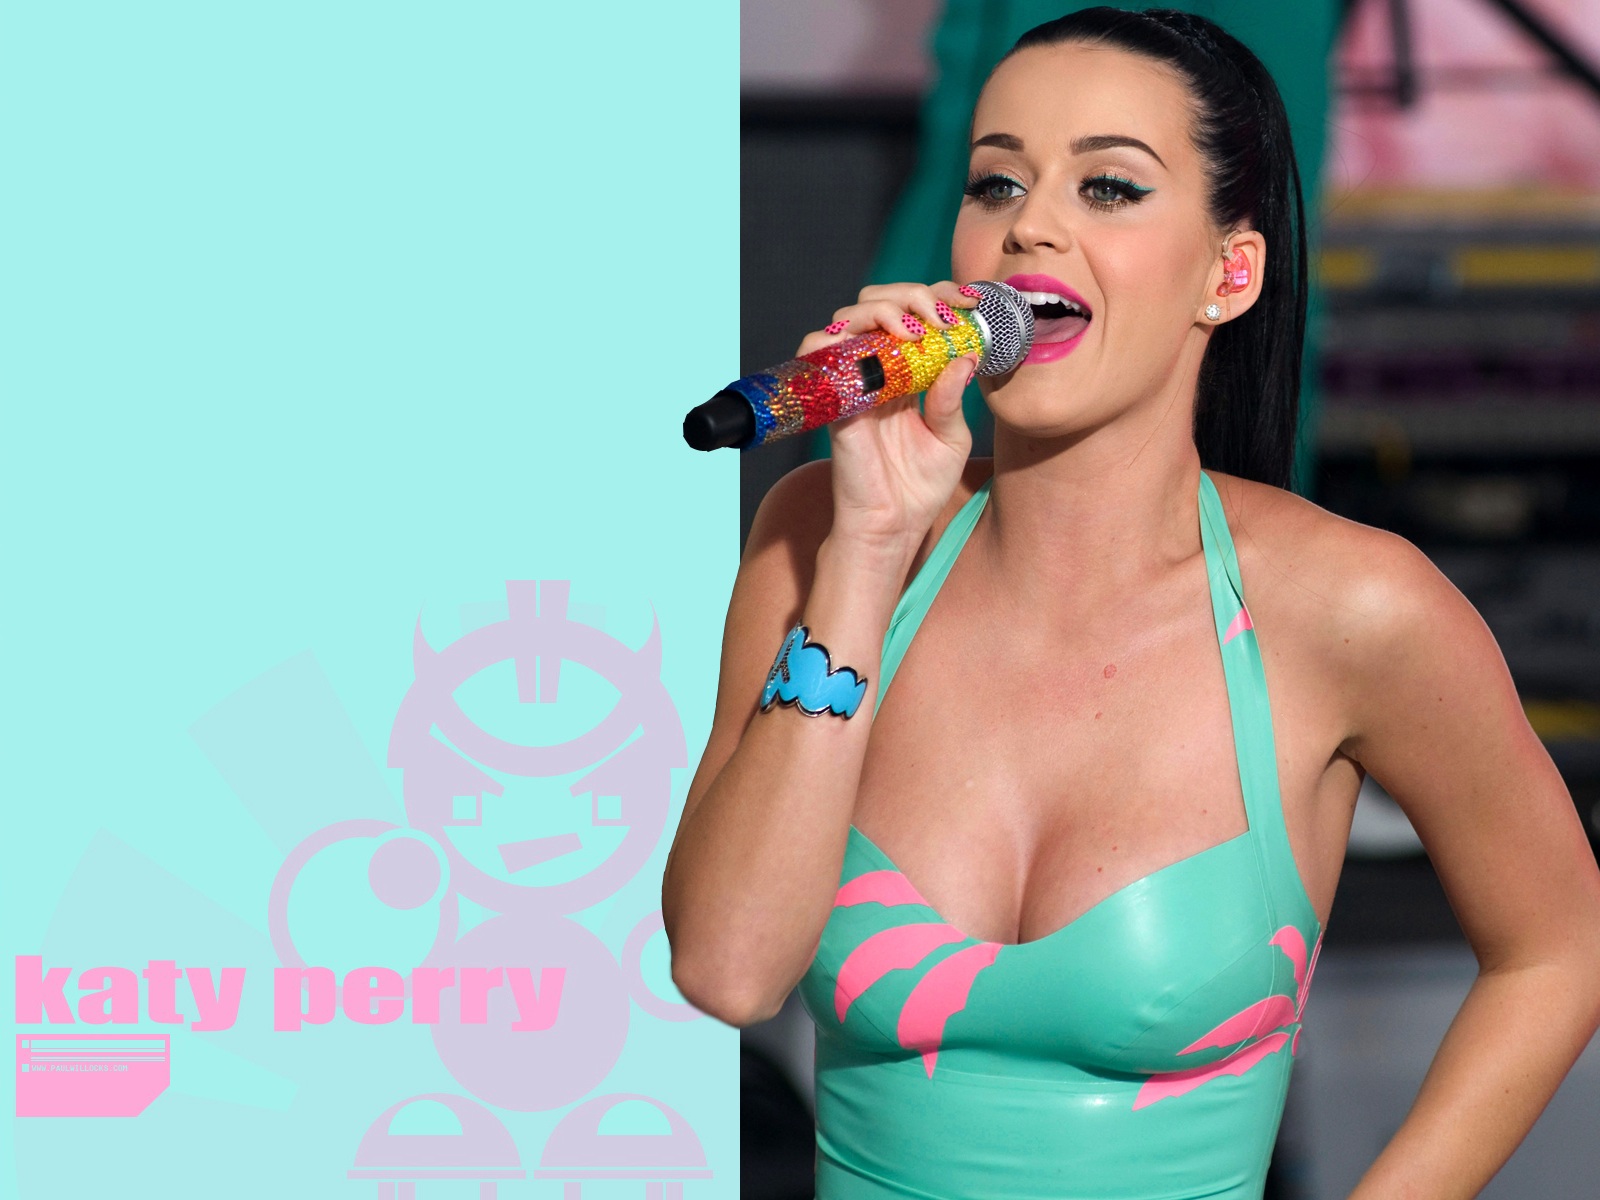 Katy Perry is wearing a hot sexy blue dress.